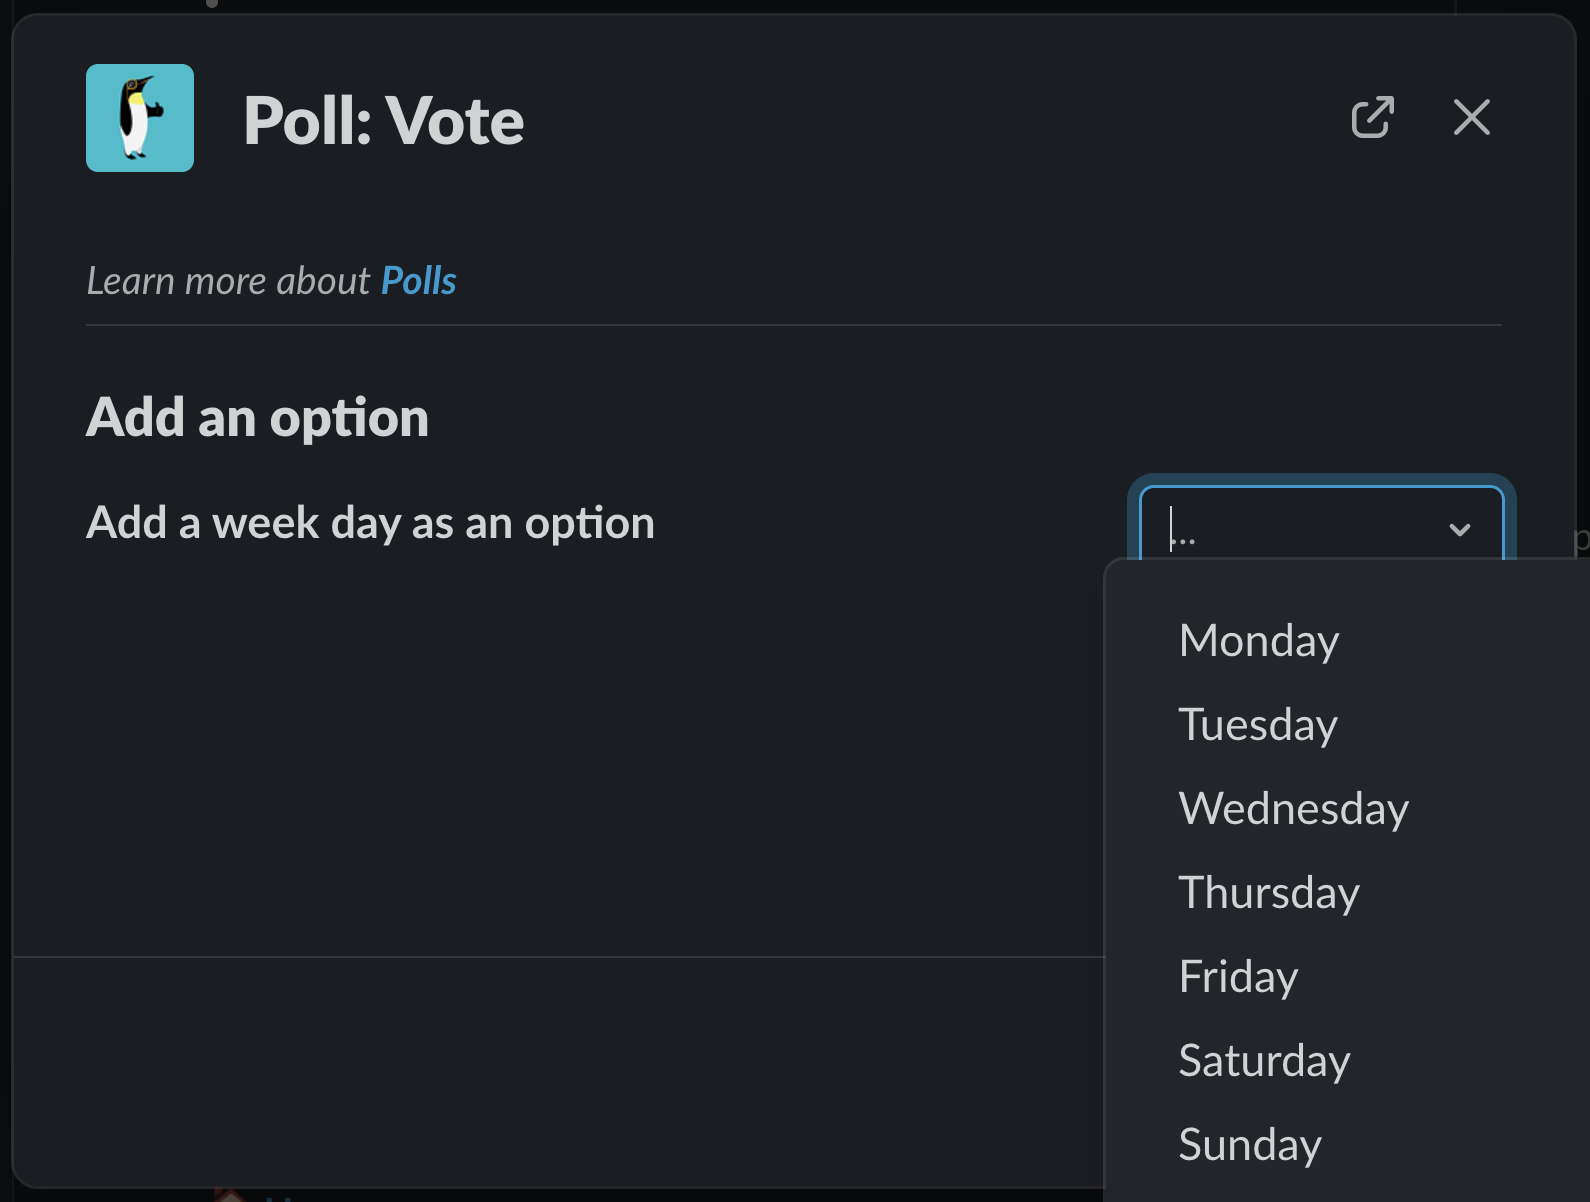 This example shows a poll with weekday options.